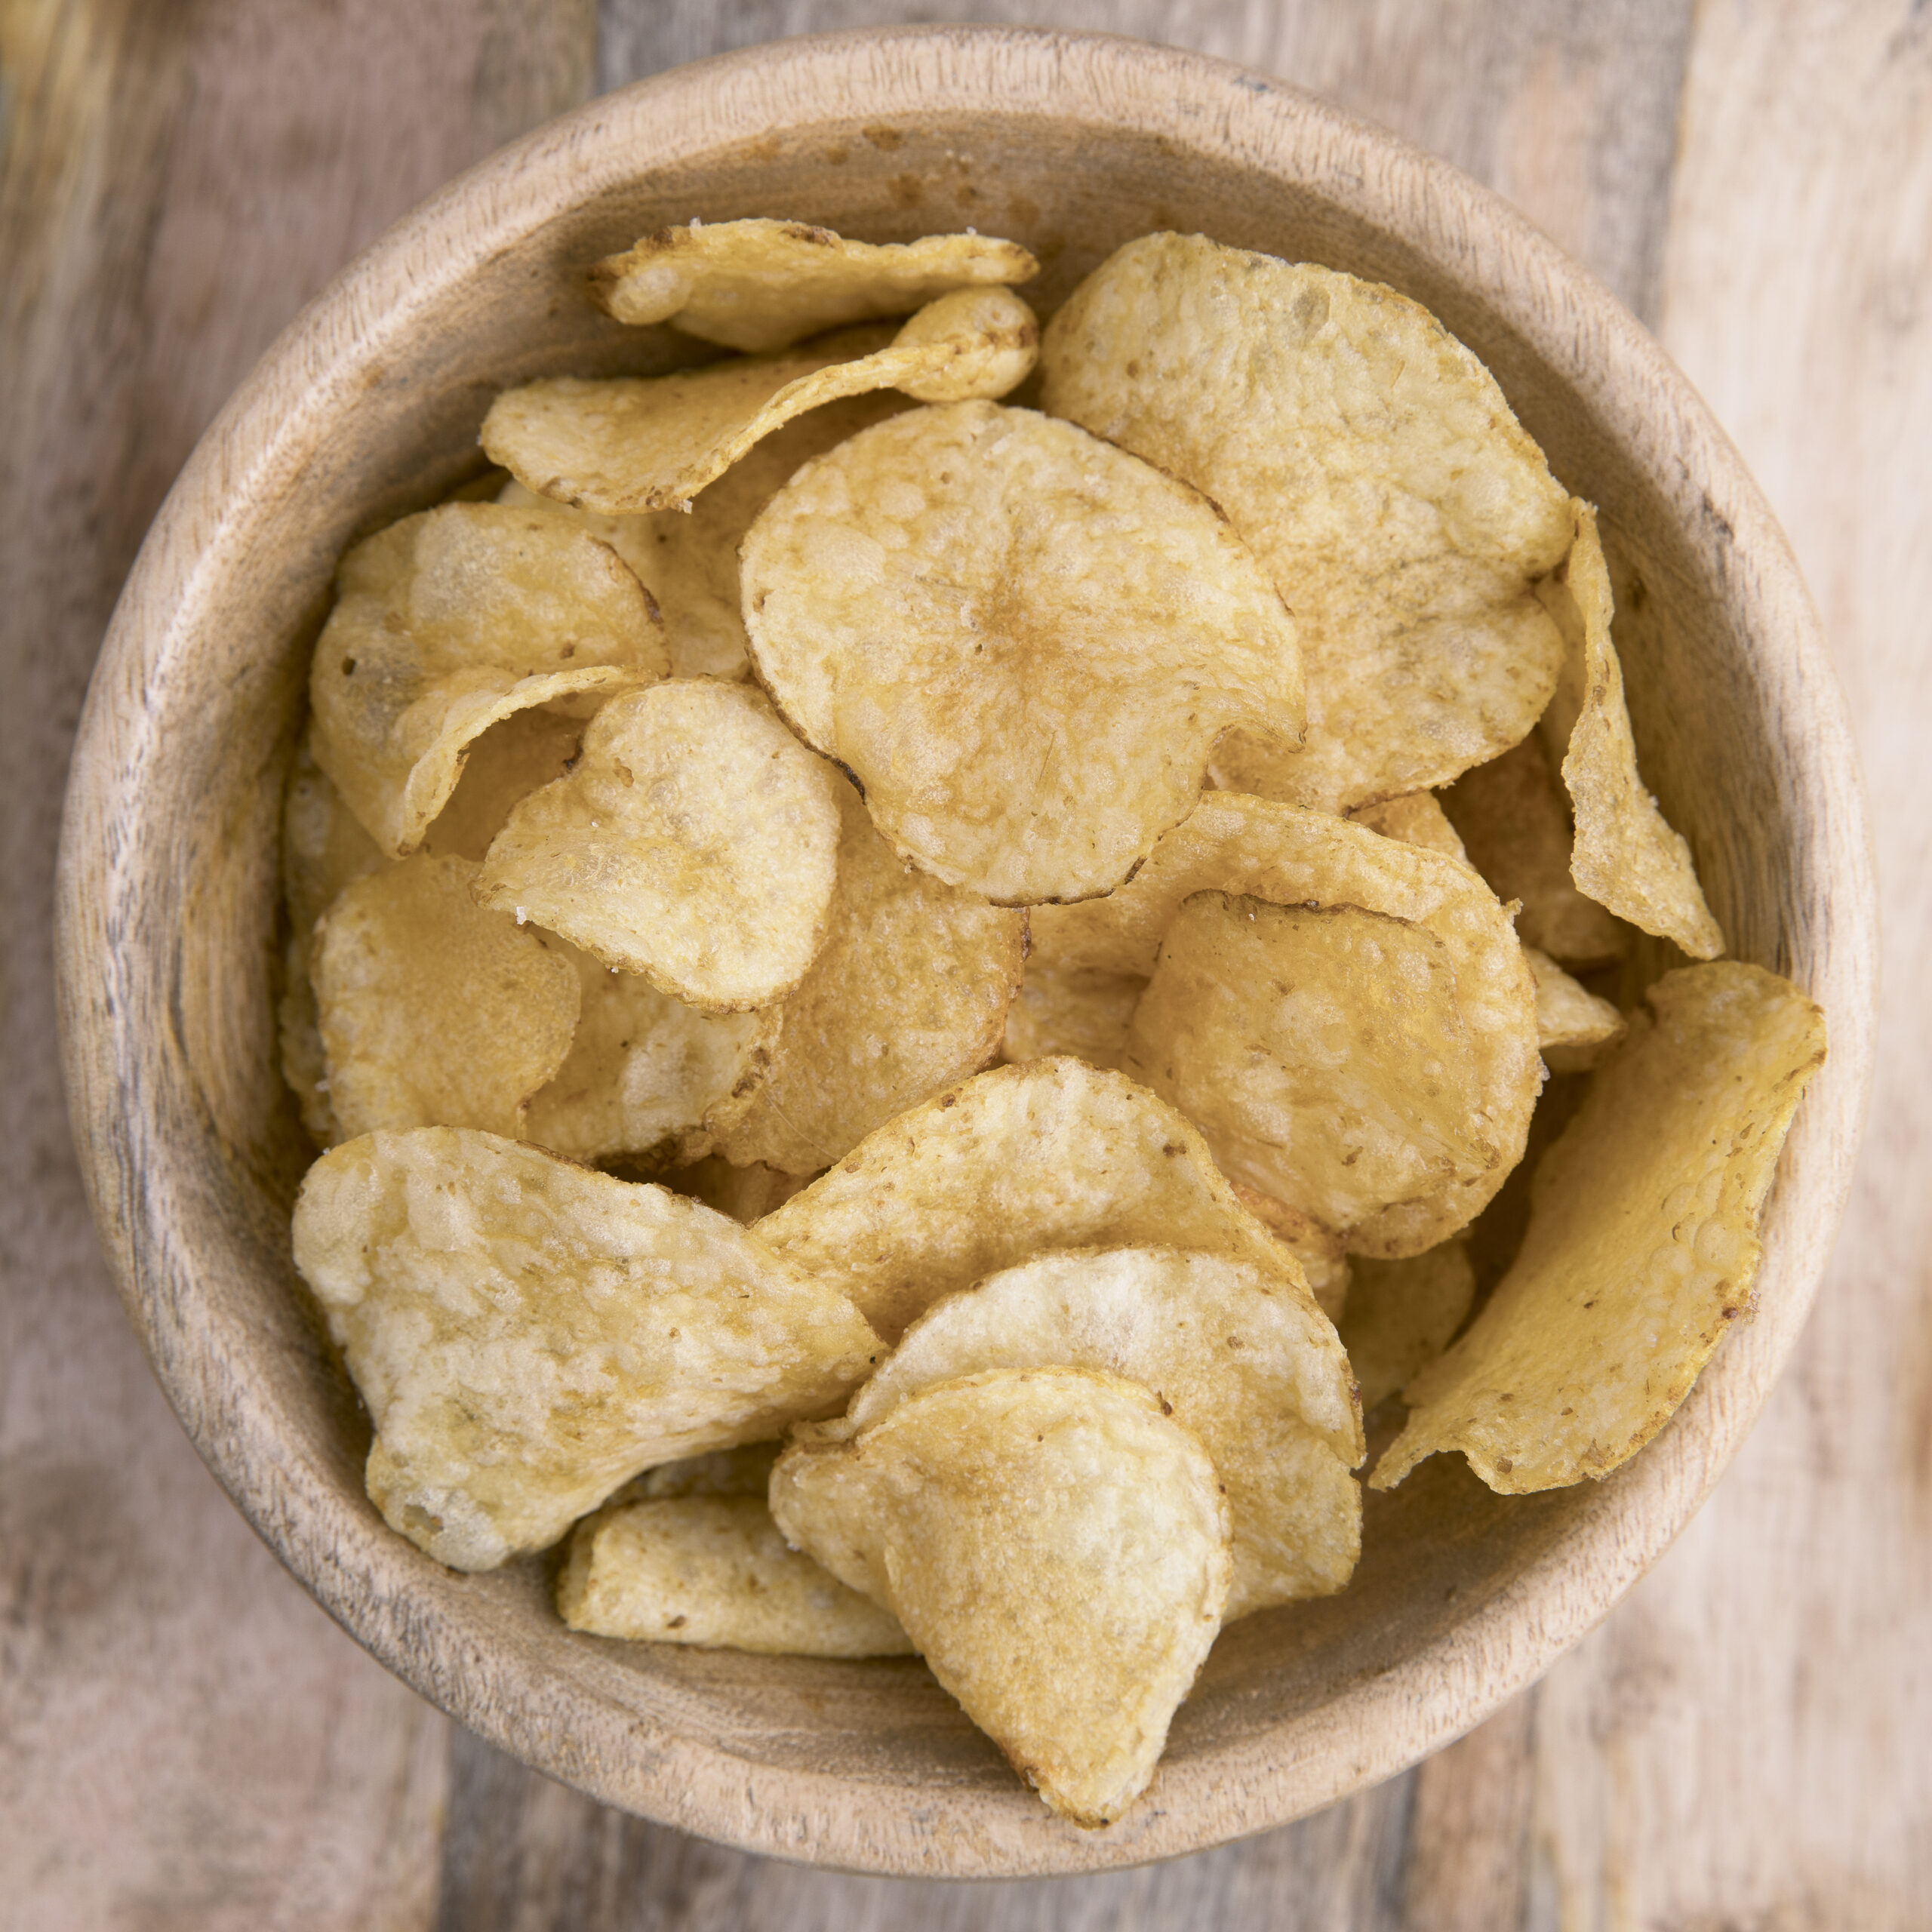 Wooden bowl filled with chips viewed from above.